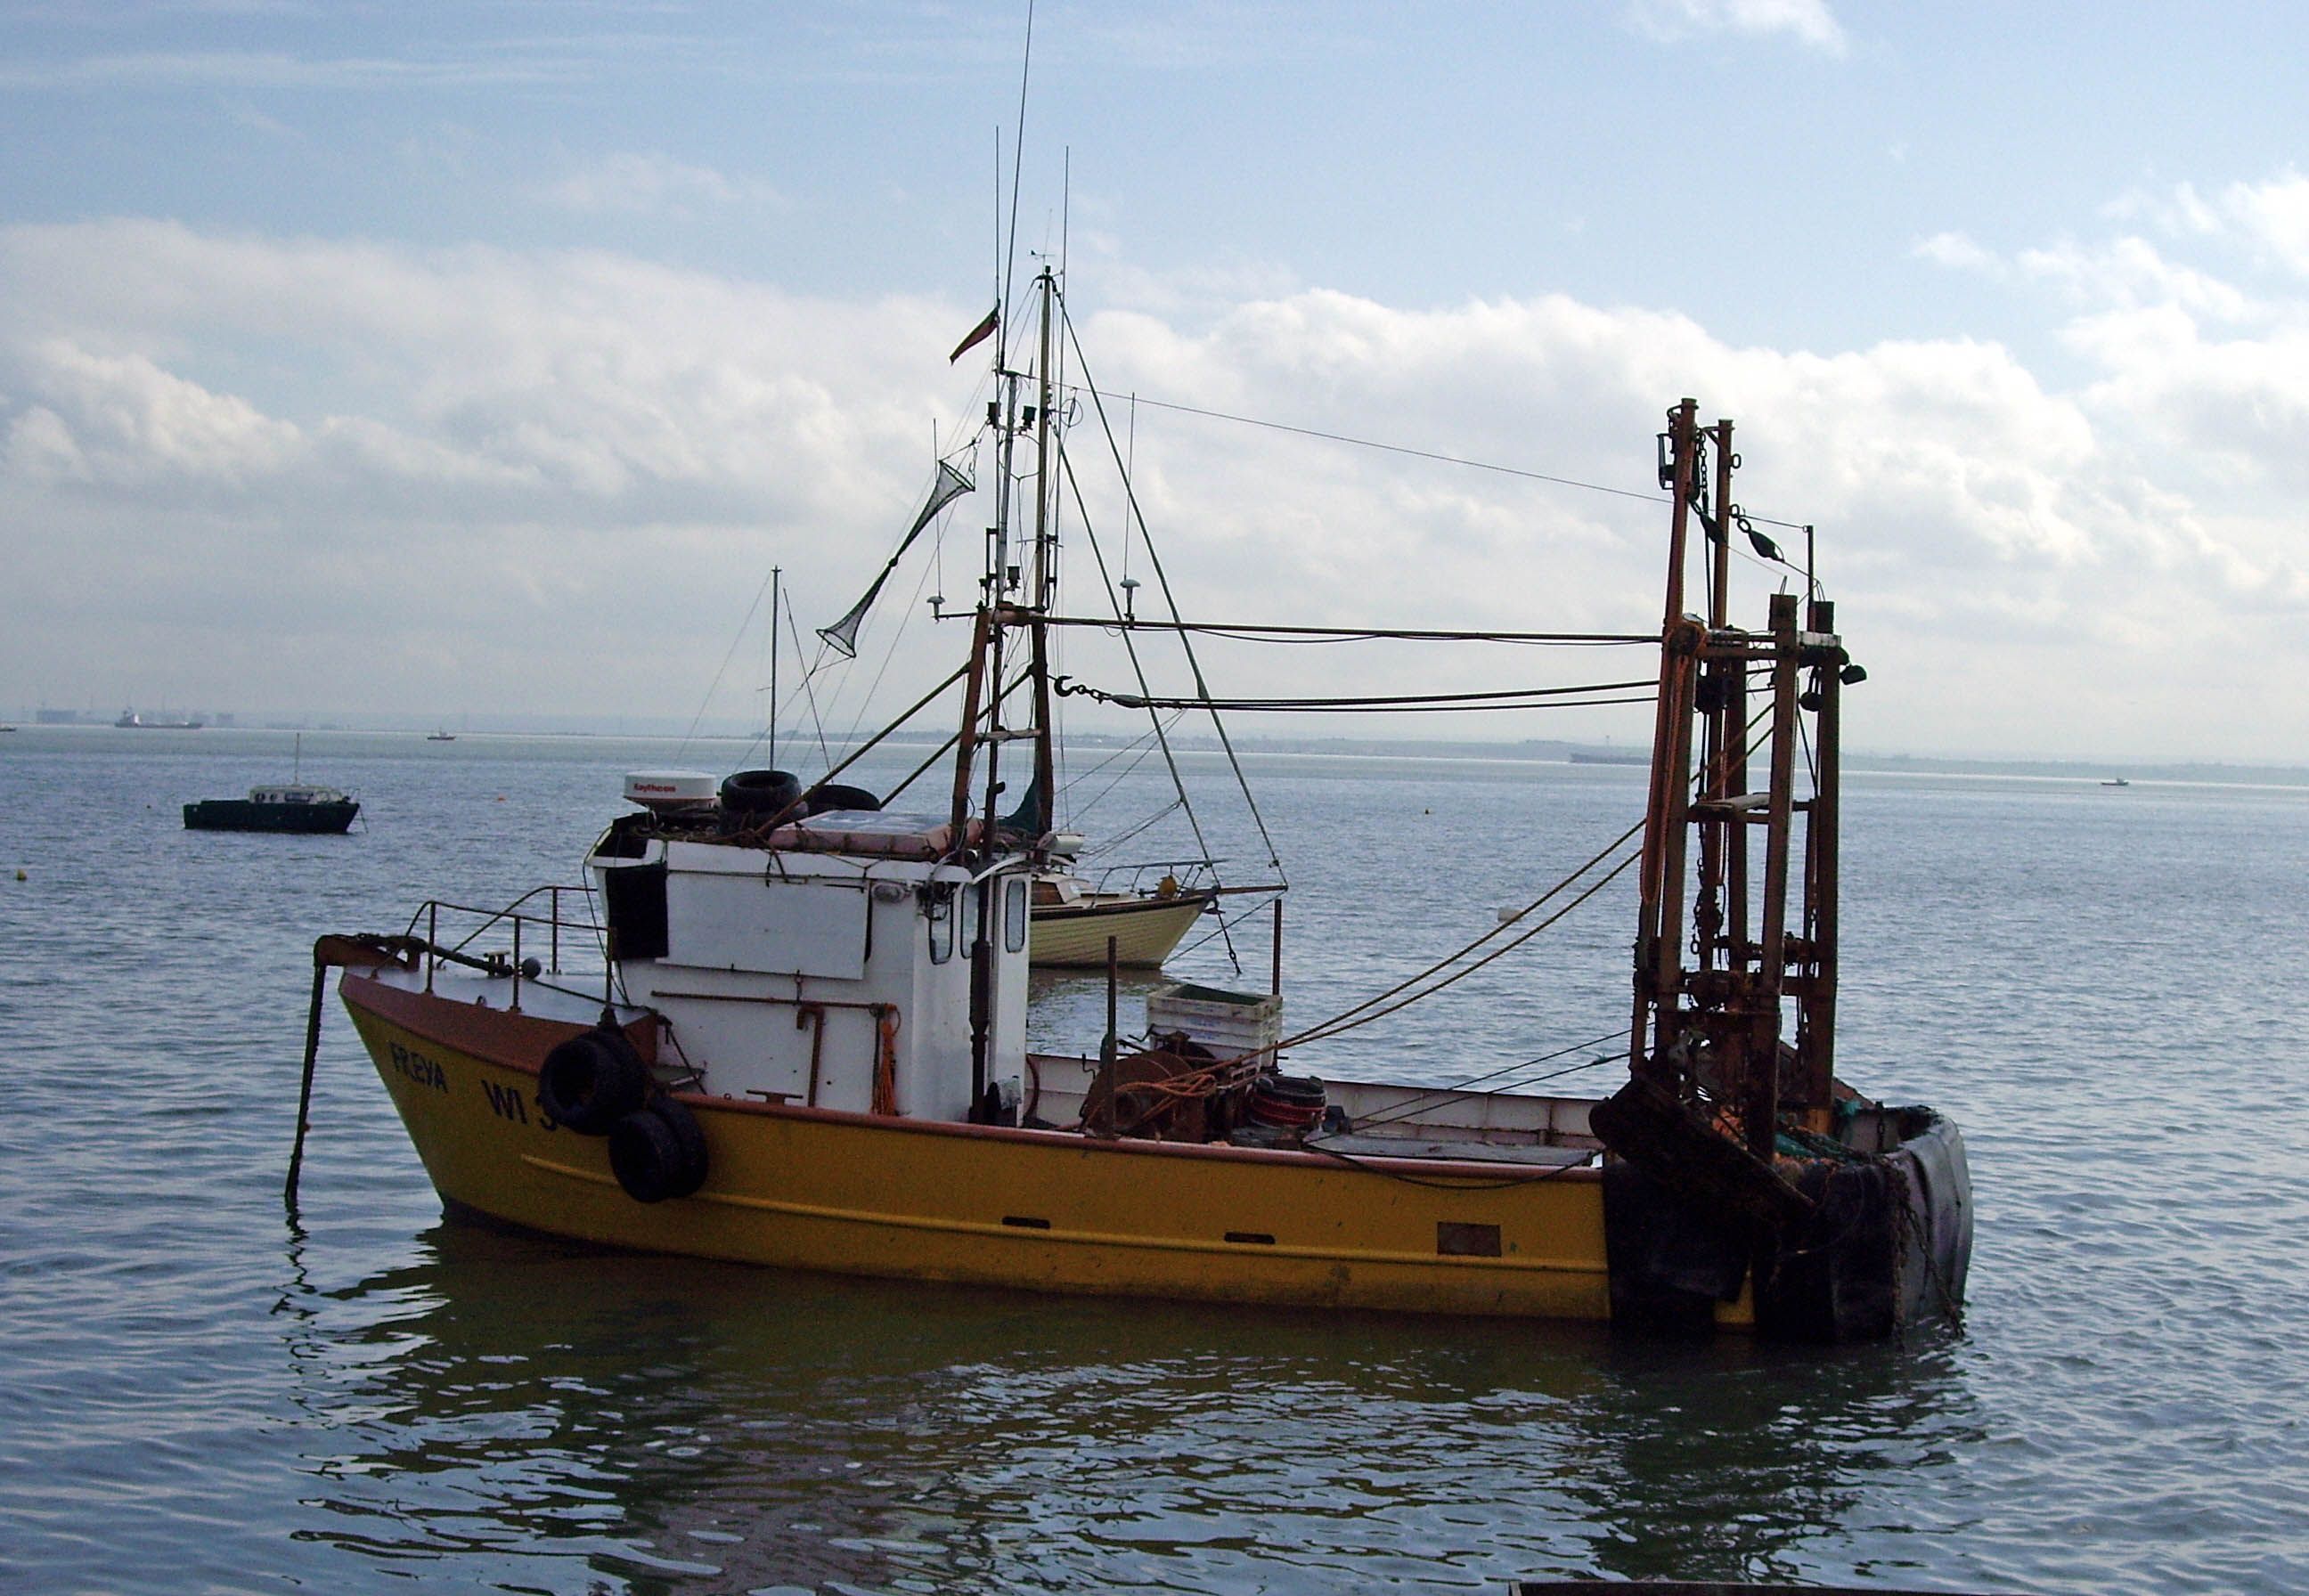 Old Fishing Boat Now That's Fishing | Fishing Action | Pinterest ...